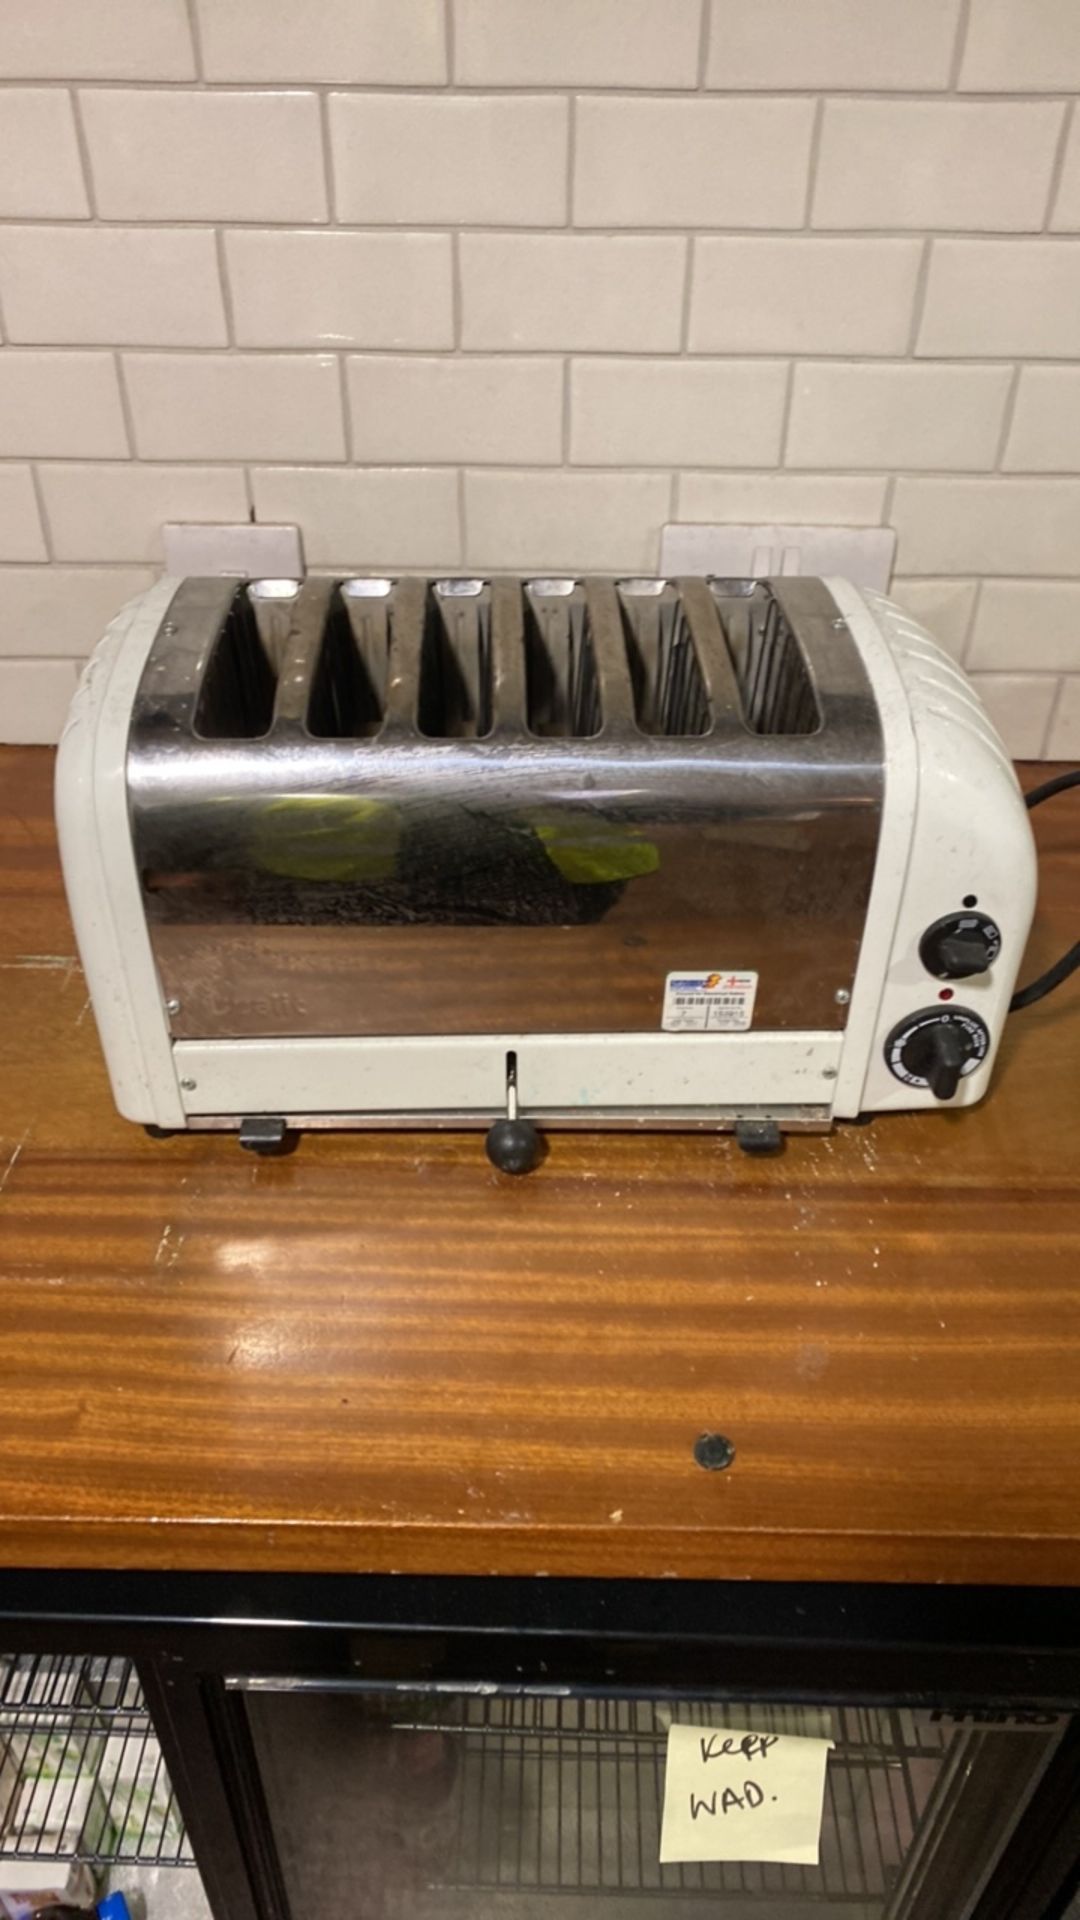 Dualit 6 piece toaster - Image 4 of 4